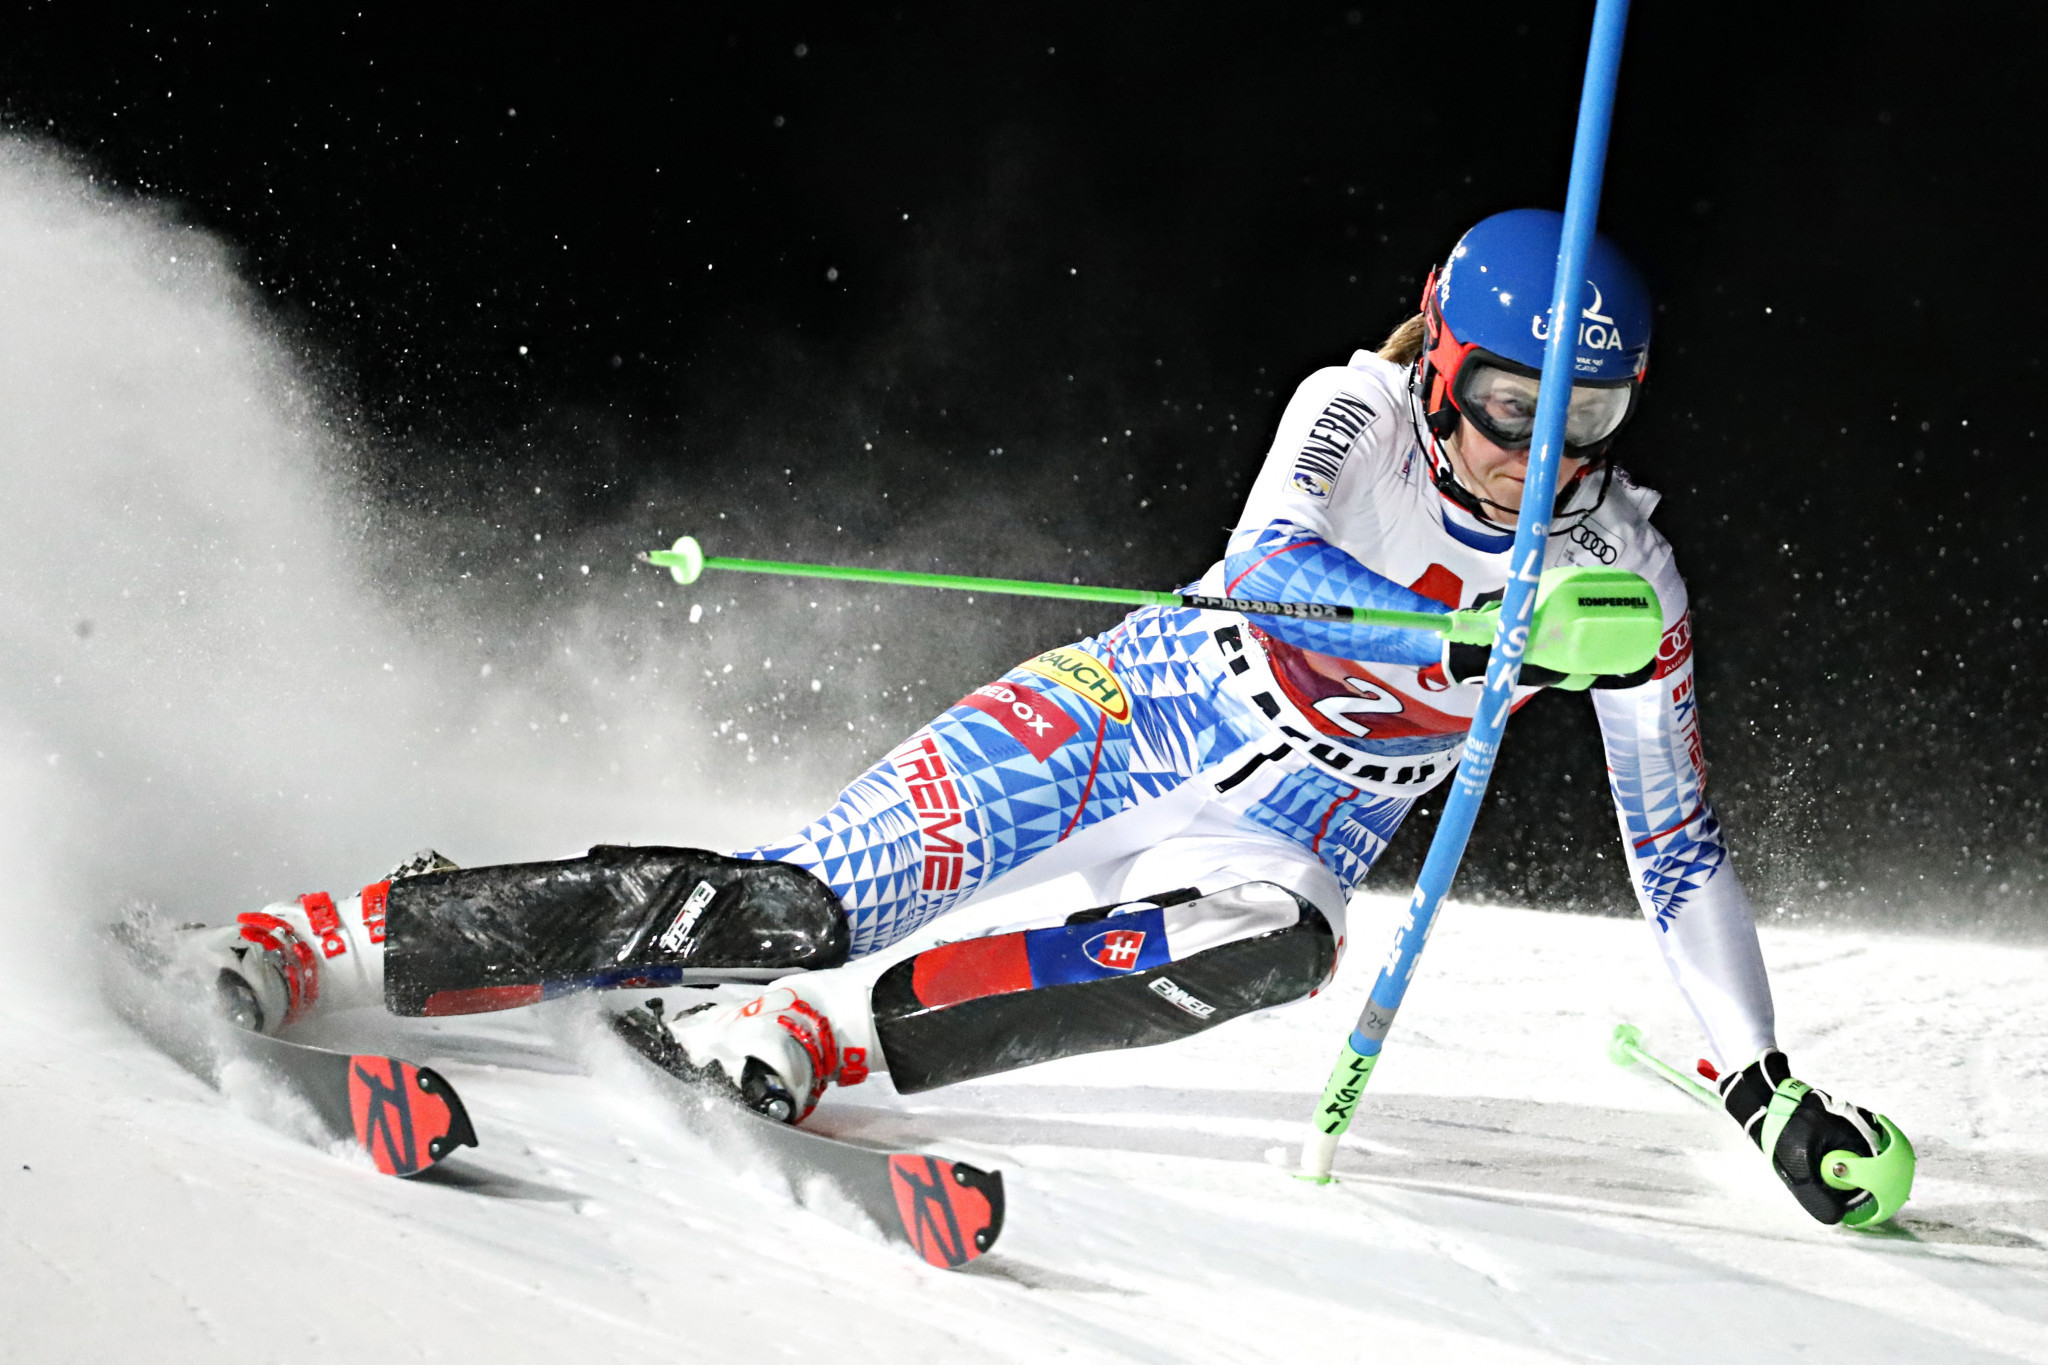 Slovakia's Petra Vlhová was in fine form at the FIS Alpine Skiing World Cup in Flachau ©Getty Images